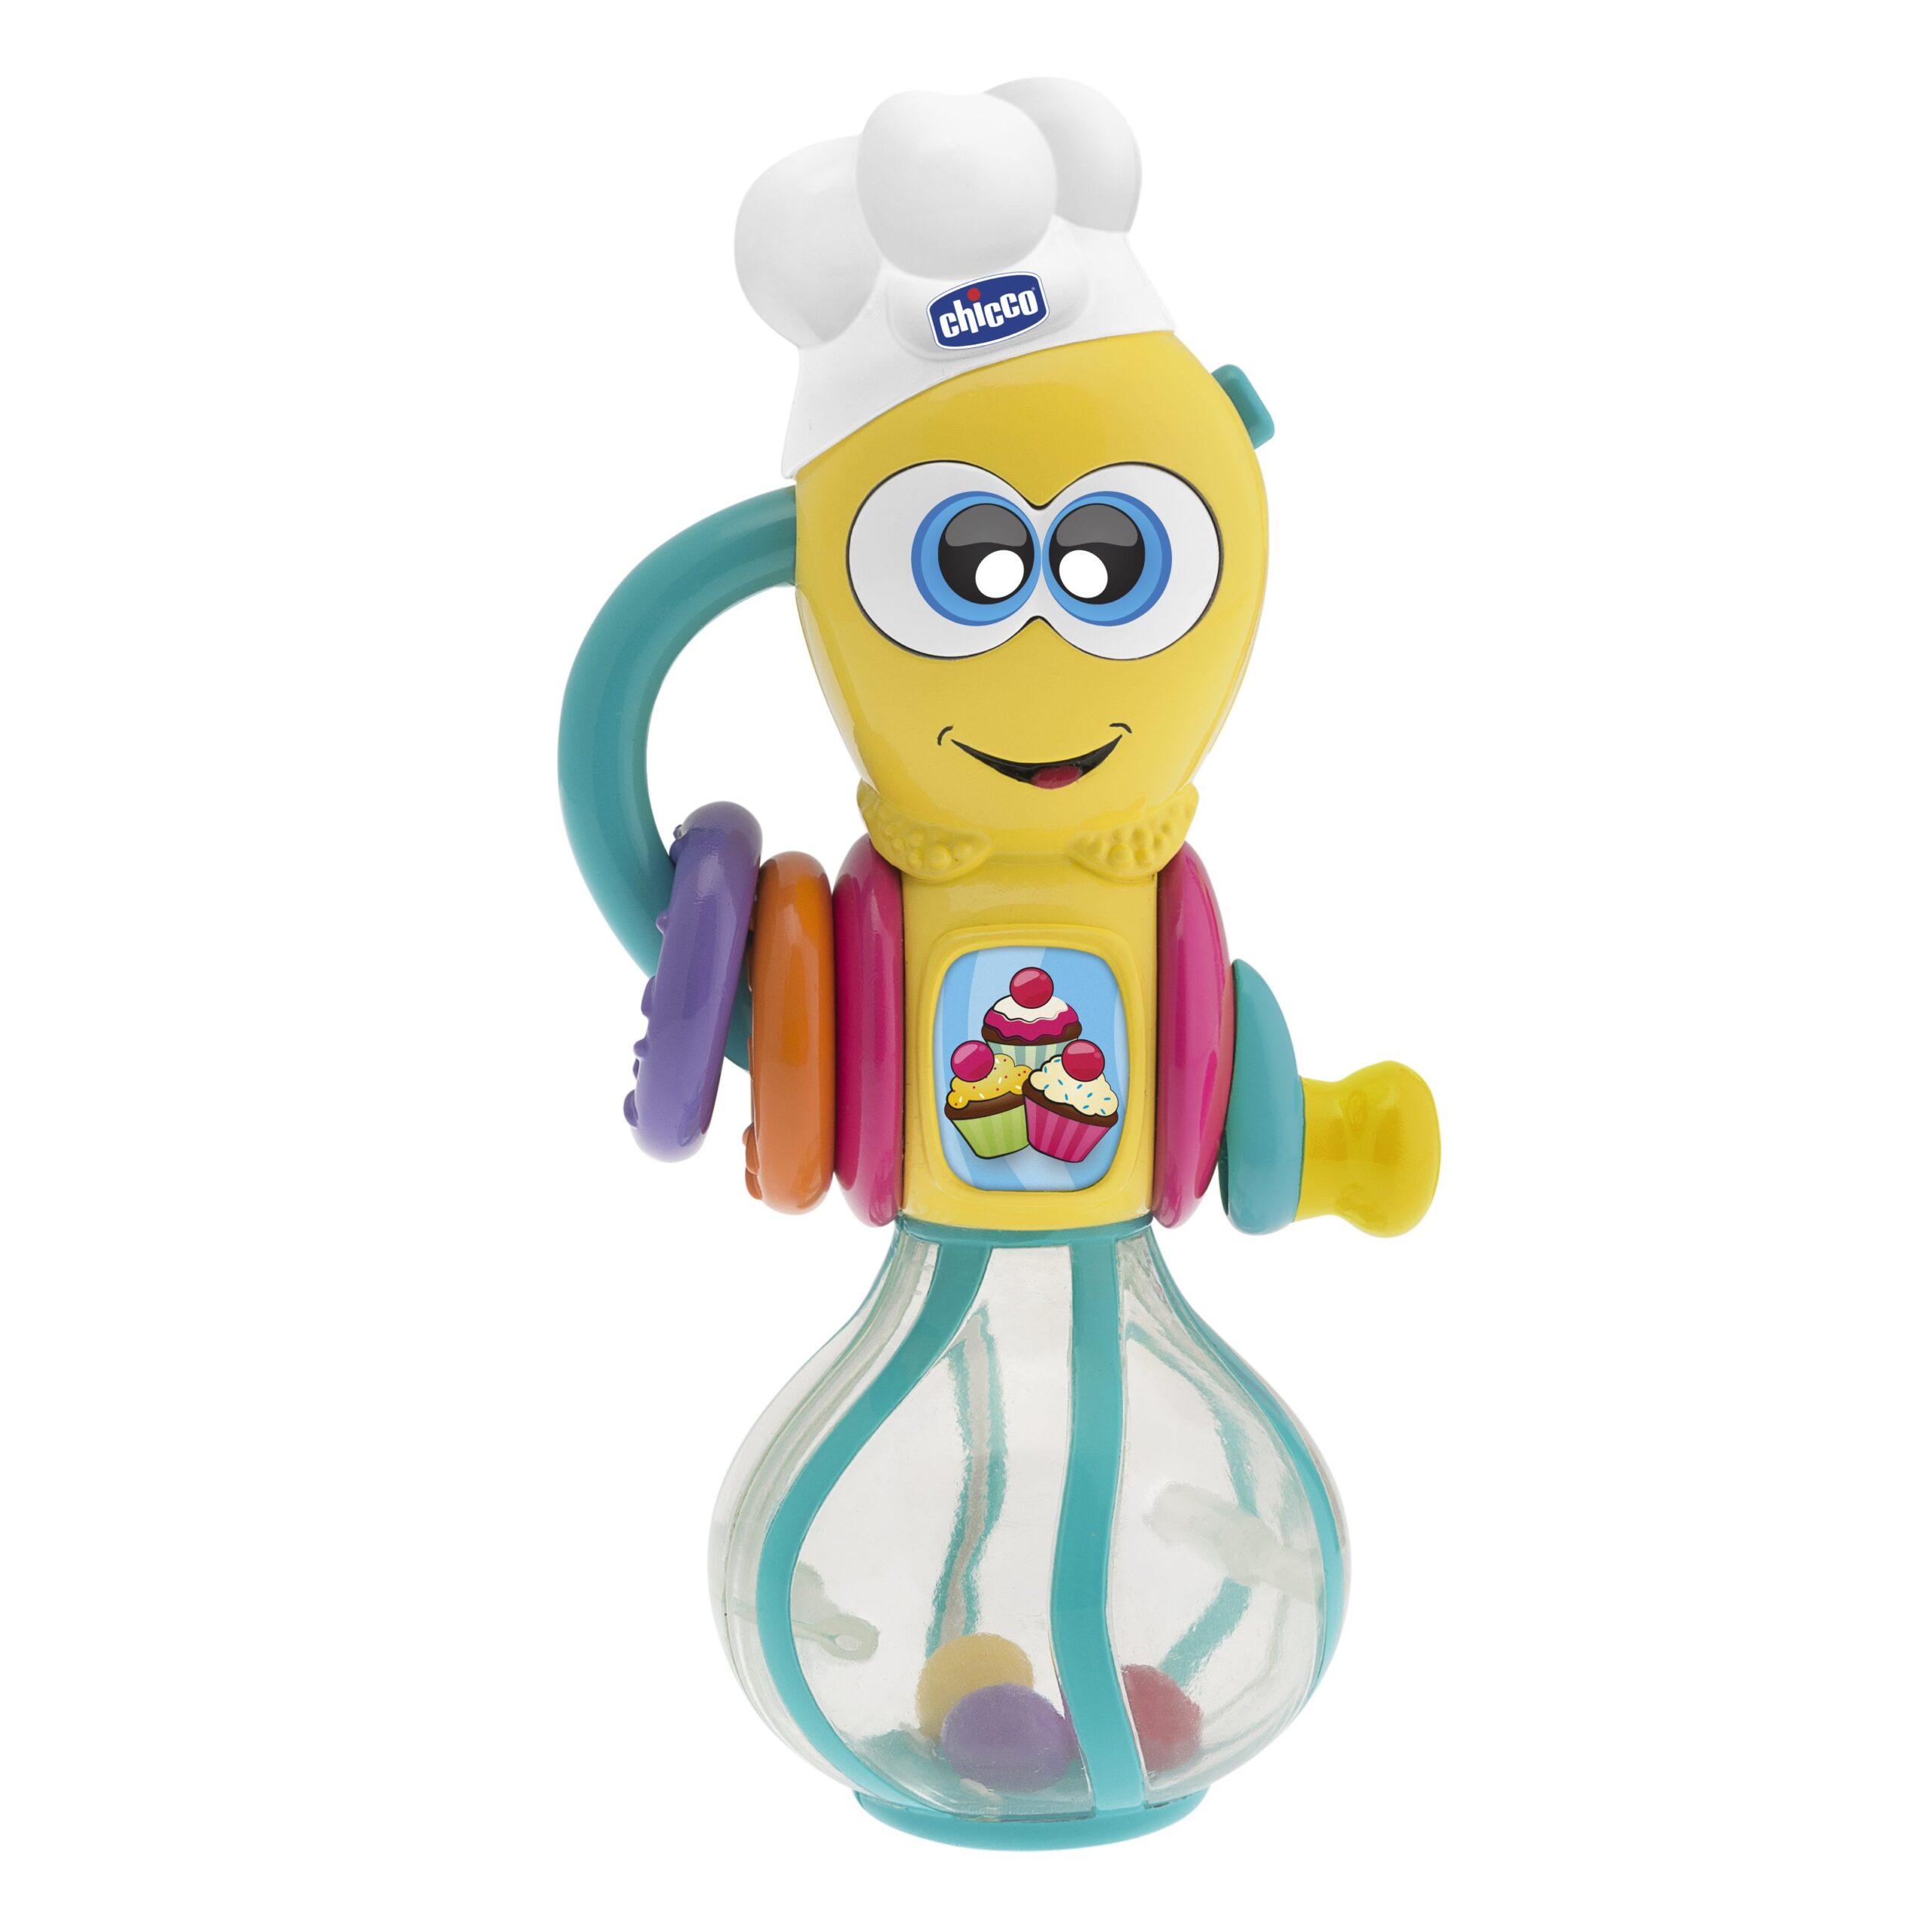 Baby chef - Chicco